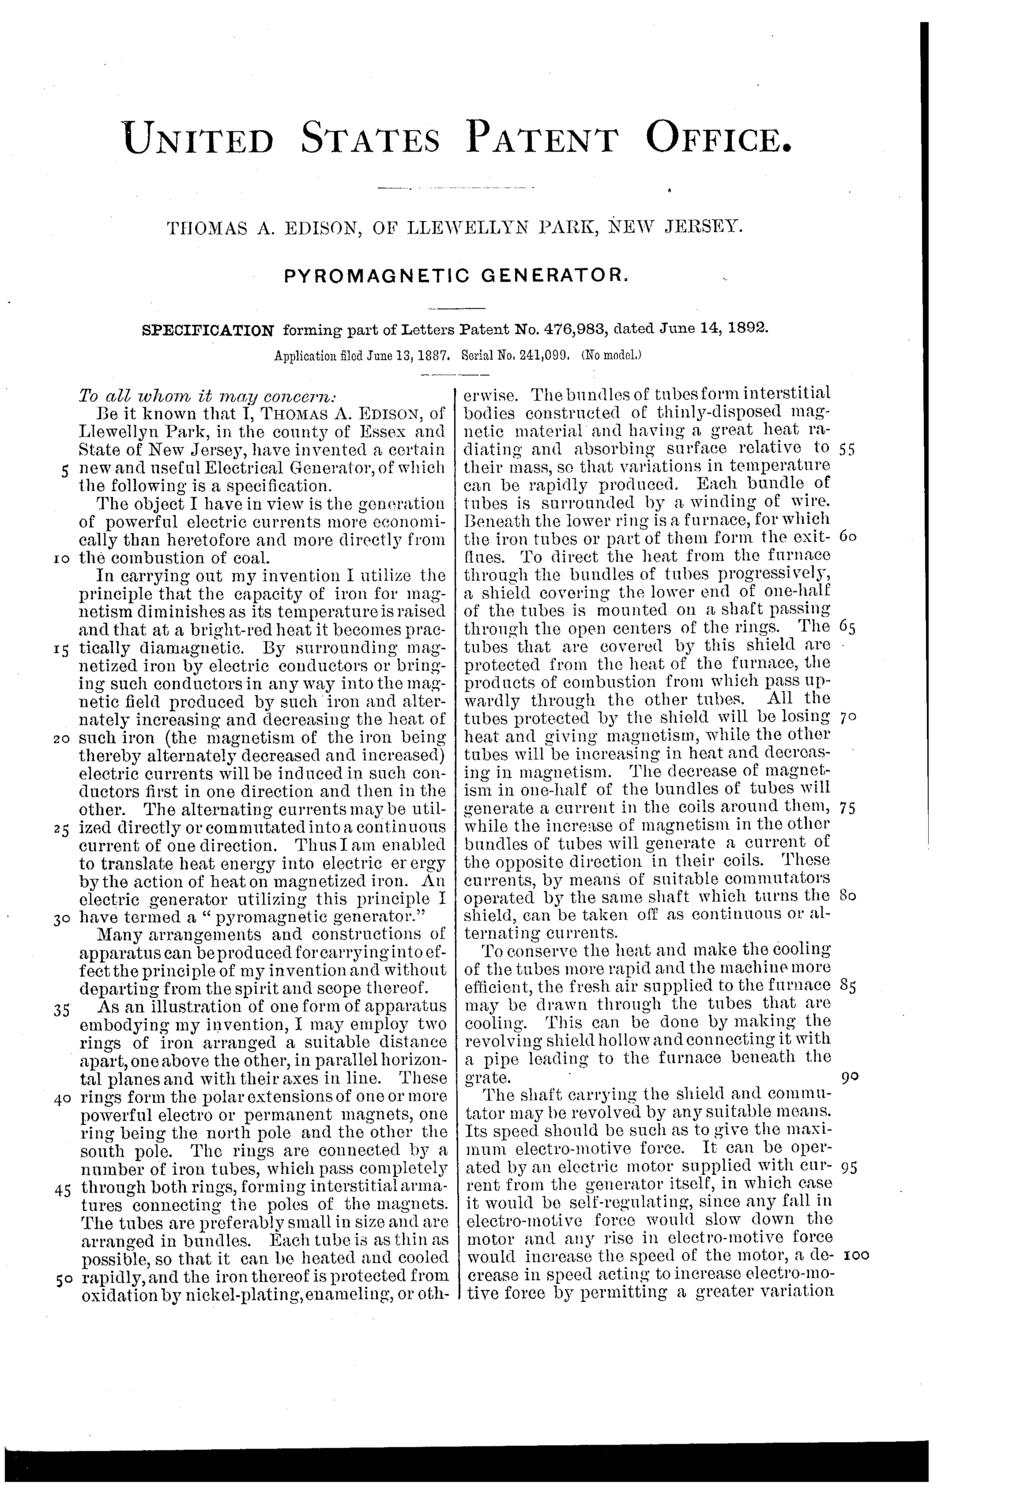 UNITED STATES PATENT OFFICE. THOMAS A. EDISON, OF LLEWELLYN PARK, NEW JERSEY. PYRO MAGNET C G ENERATOR. 8 SPECIFICATION forming part of Letters Patent No., dated June 14, 1892.